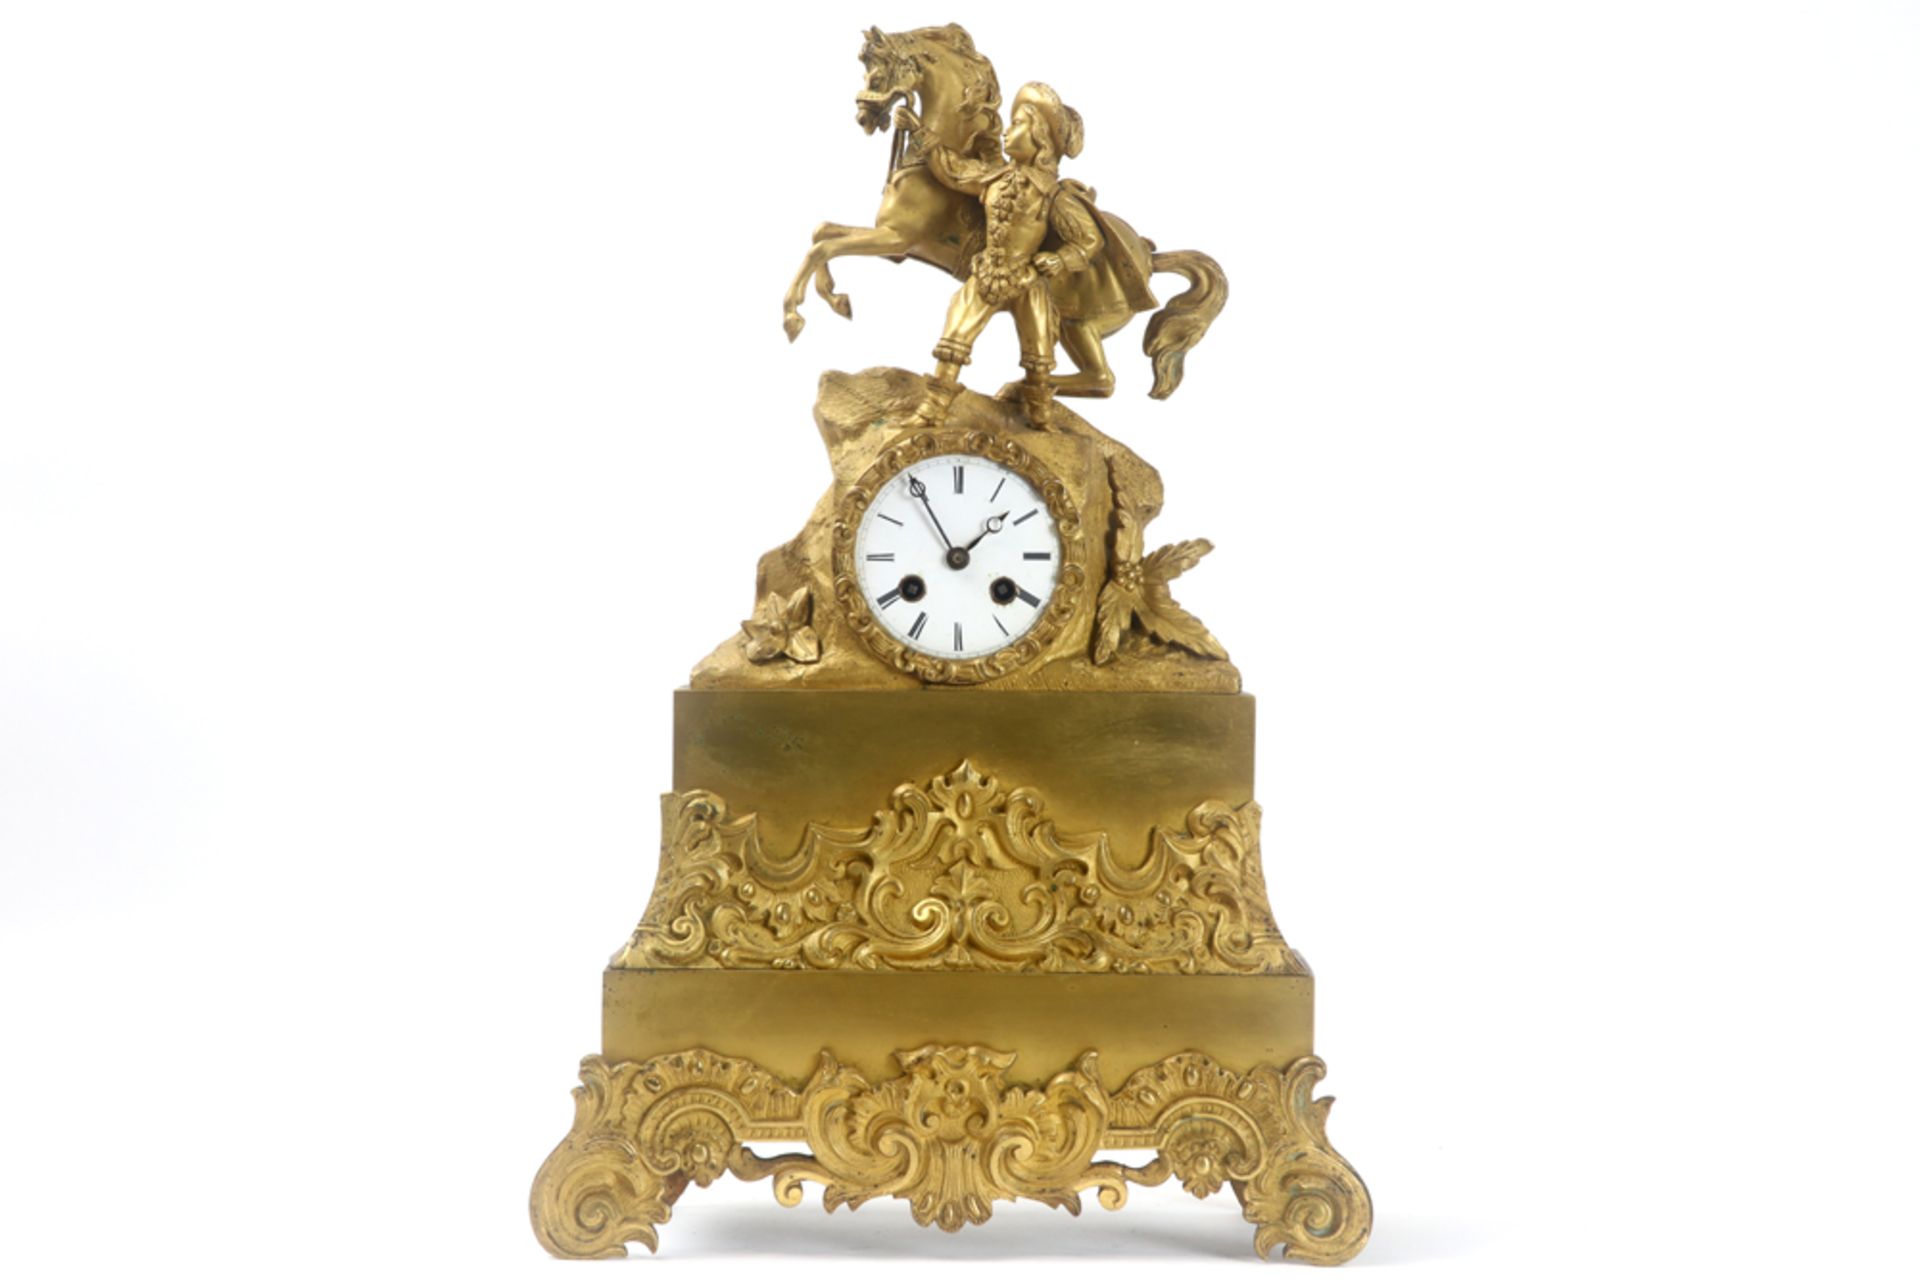 19th Cent. clock with case in gilded bronze and with "Japy frêres" signed work || Negentiende eeuwse